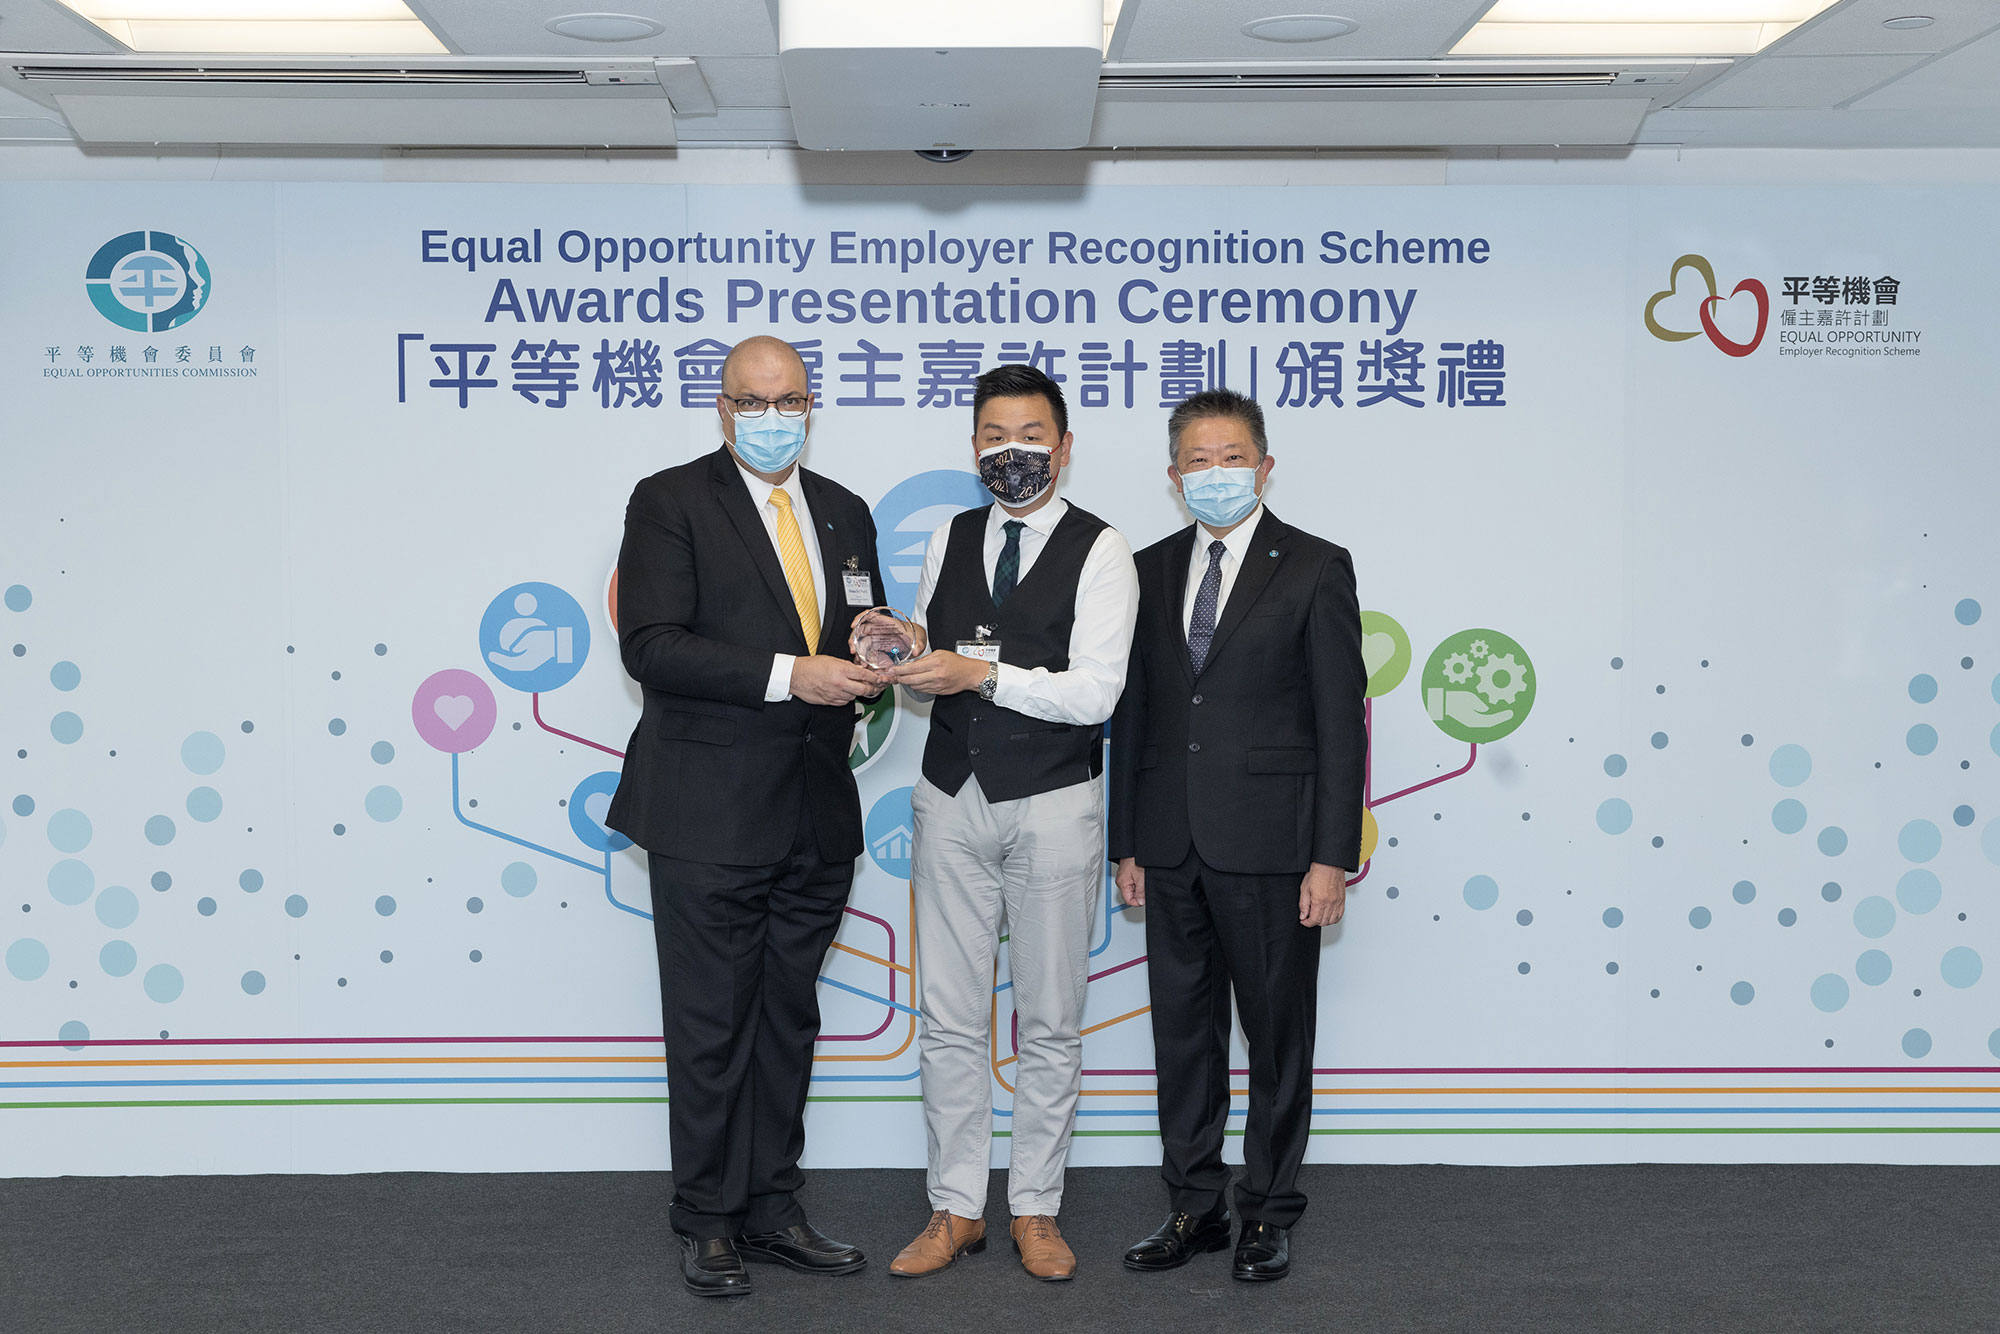 Mr Ricky CHU Man-kin, IDS, Chairperson of the Equal Opportunities Commission (right) and Mr Mohan DATWANI, EOC Member and Convenor of the Legal and Complaints Committee (left), present the trophy to the representative of Survforce Company Limited (centre), winner of the Outstanding SME Award of the Equal Opportunity Employer Recognition Scheme. 